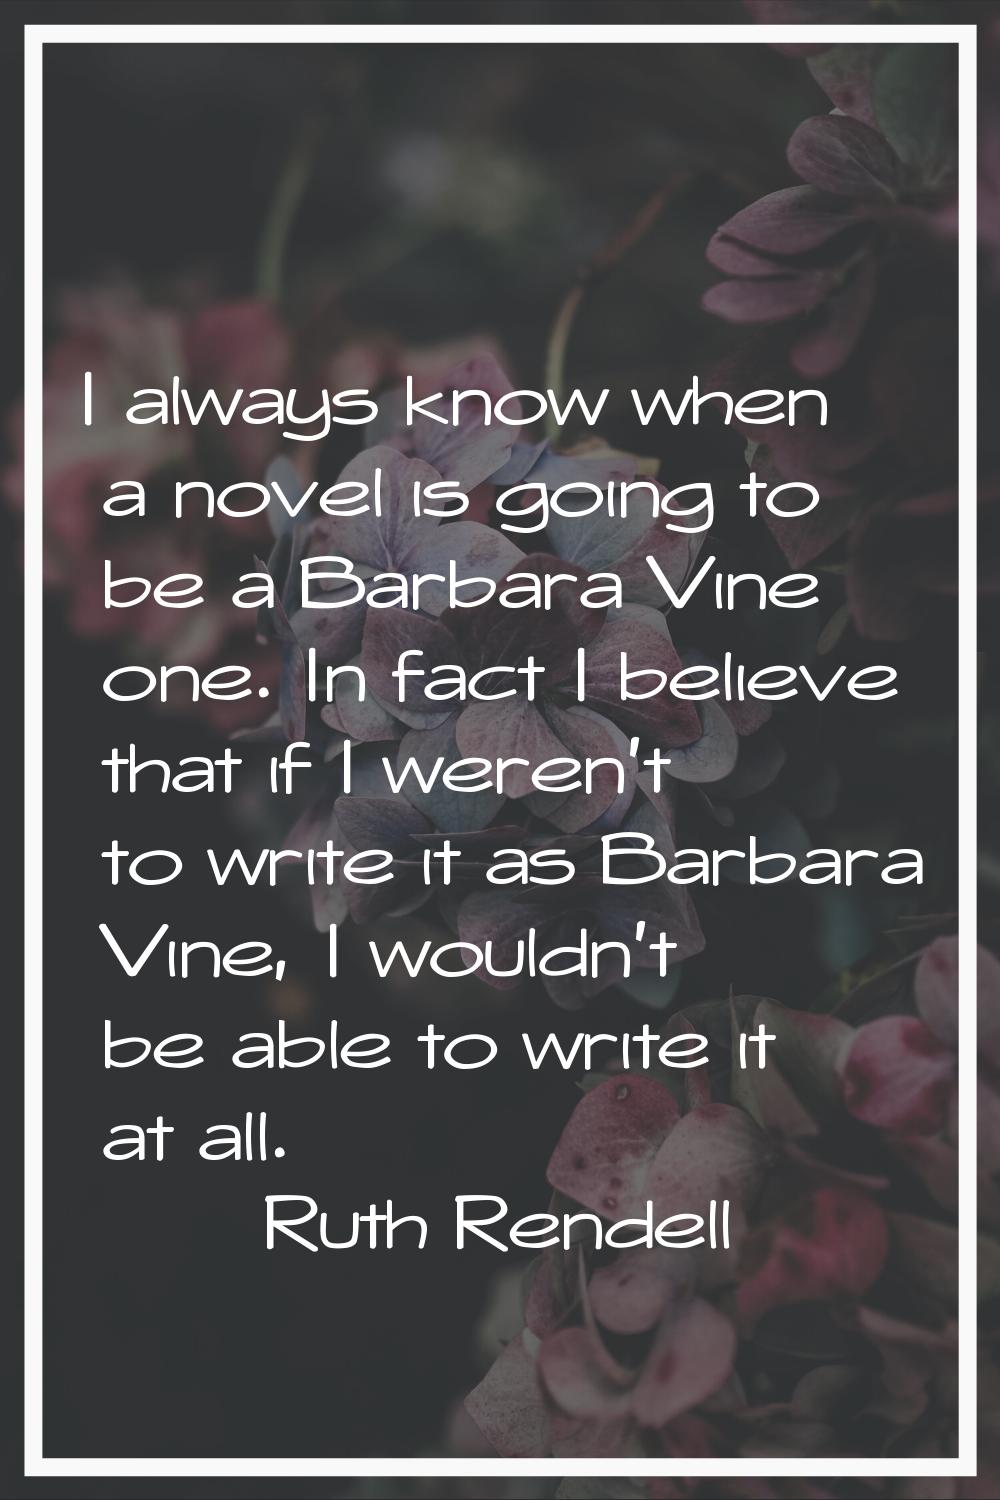 I always know when a novel is going to be a Barbara Vine one. In fact I believe that if I weren't t